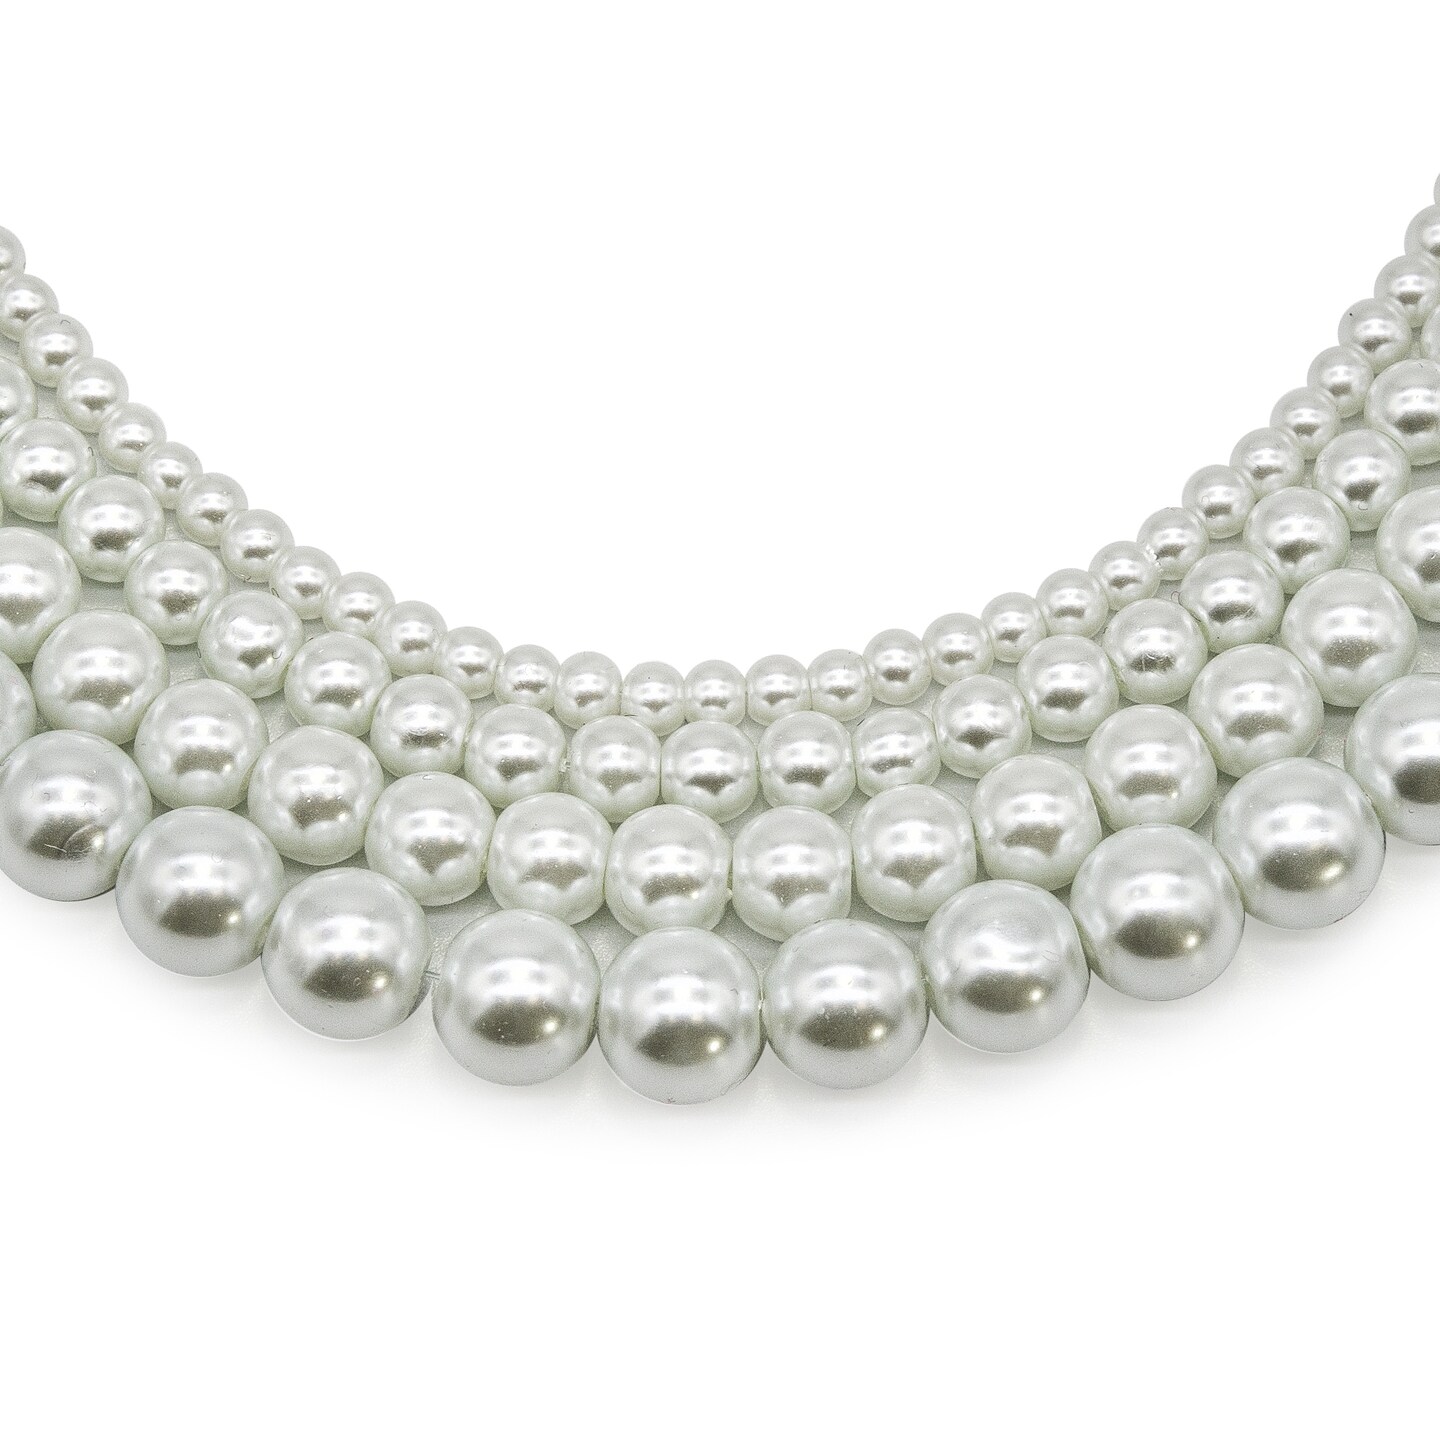 4-6-8-10mm White Glass Pearl Beads on 30-Inch Strand